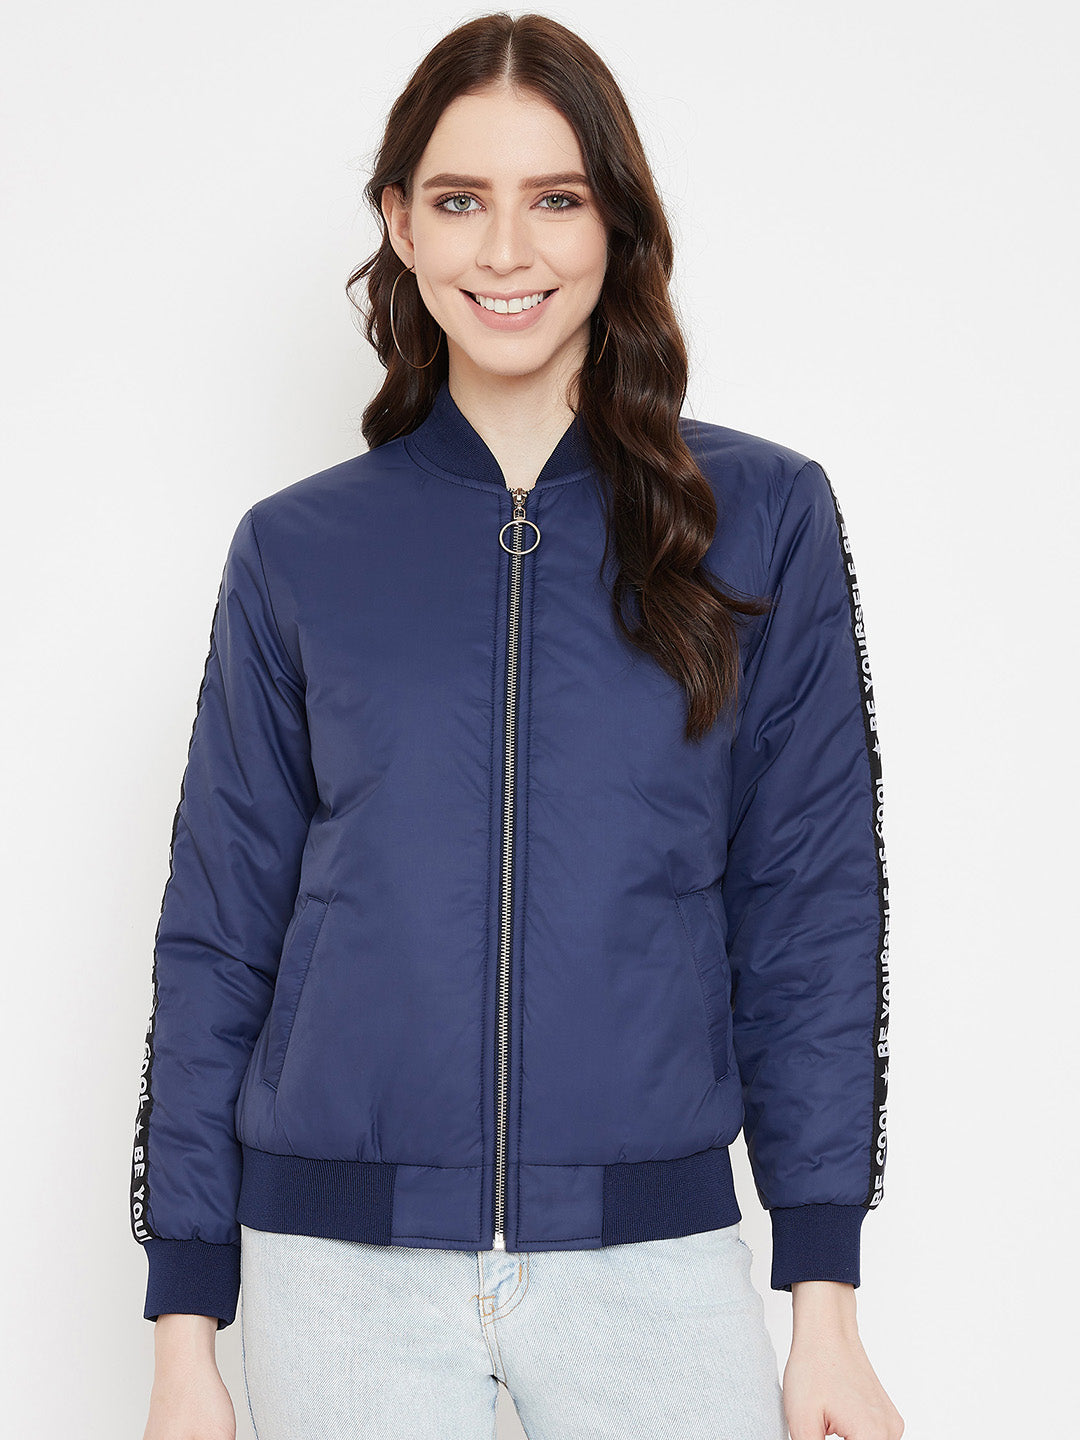 Austin Wood Women's Navy Blue Solid Full Sleeves Bomber Neck Jacket With Size Tape